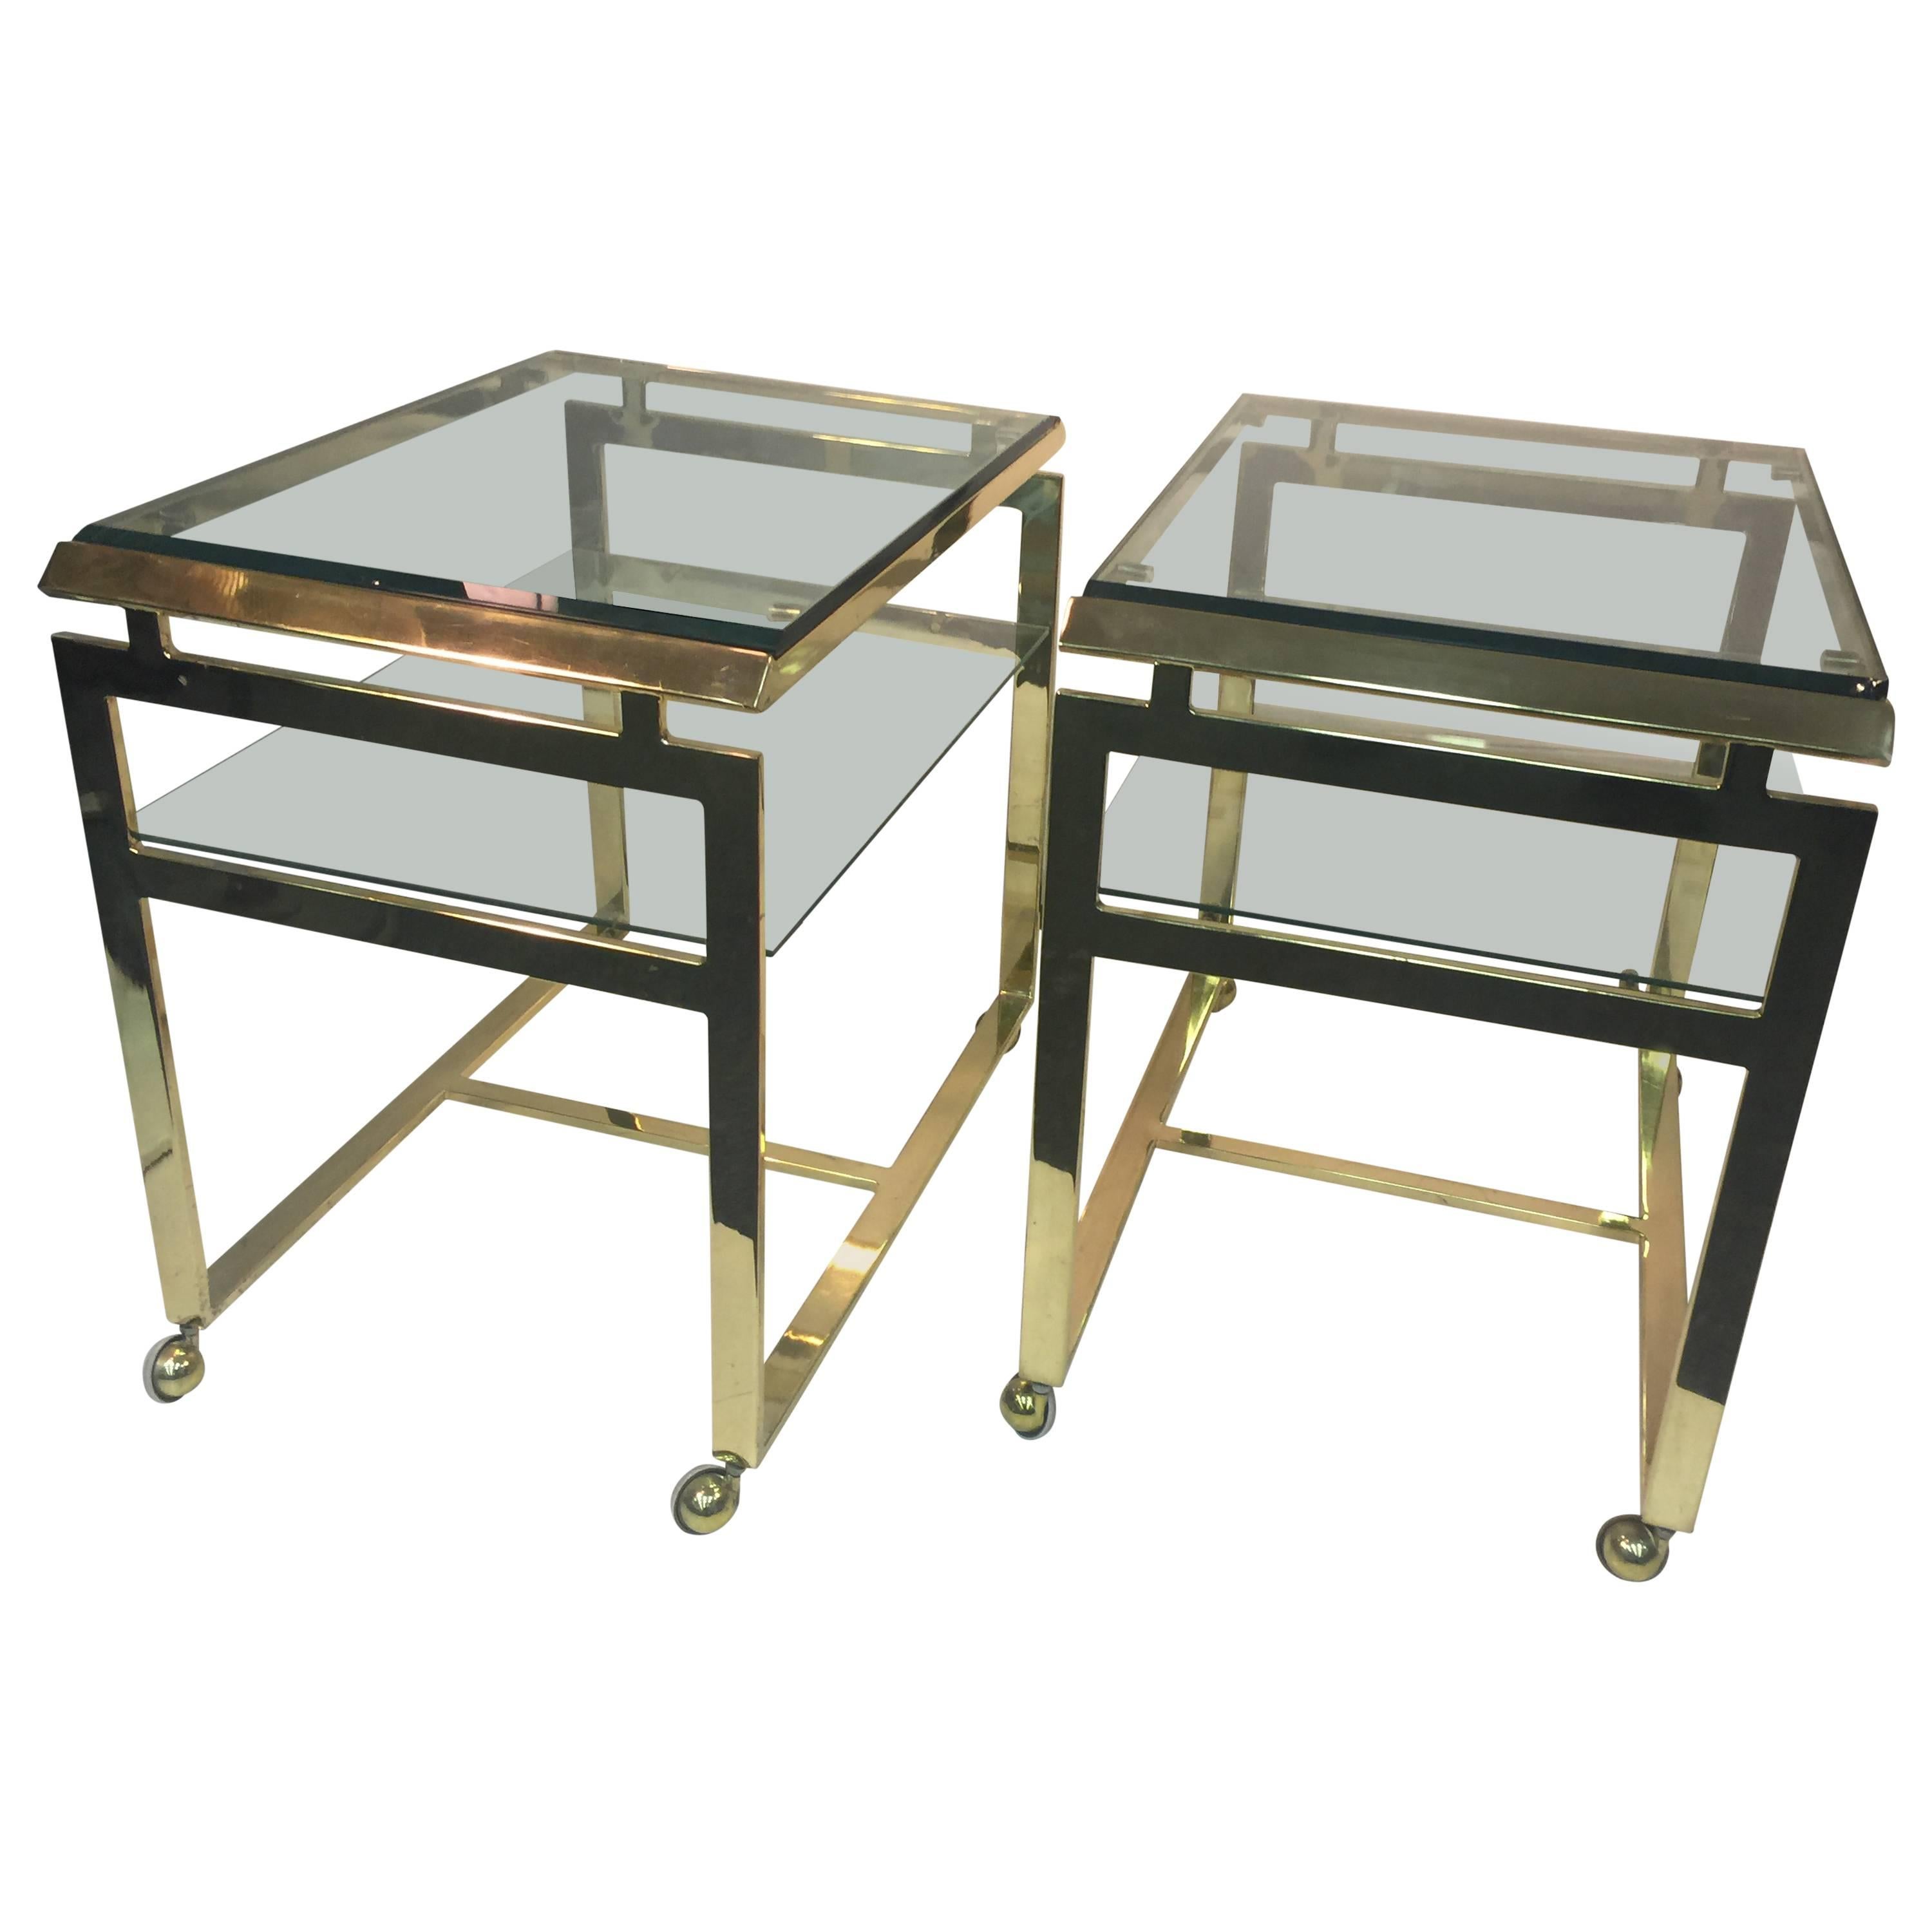 Striking Pair of Brass Tea or Serving Carts by Milo Baughman For Sale